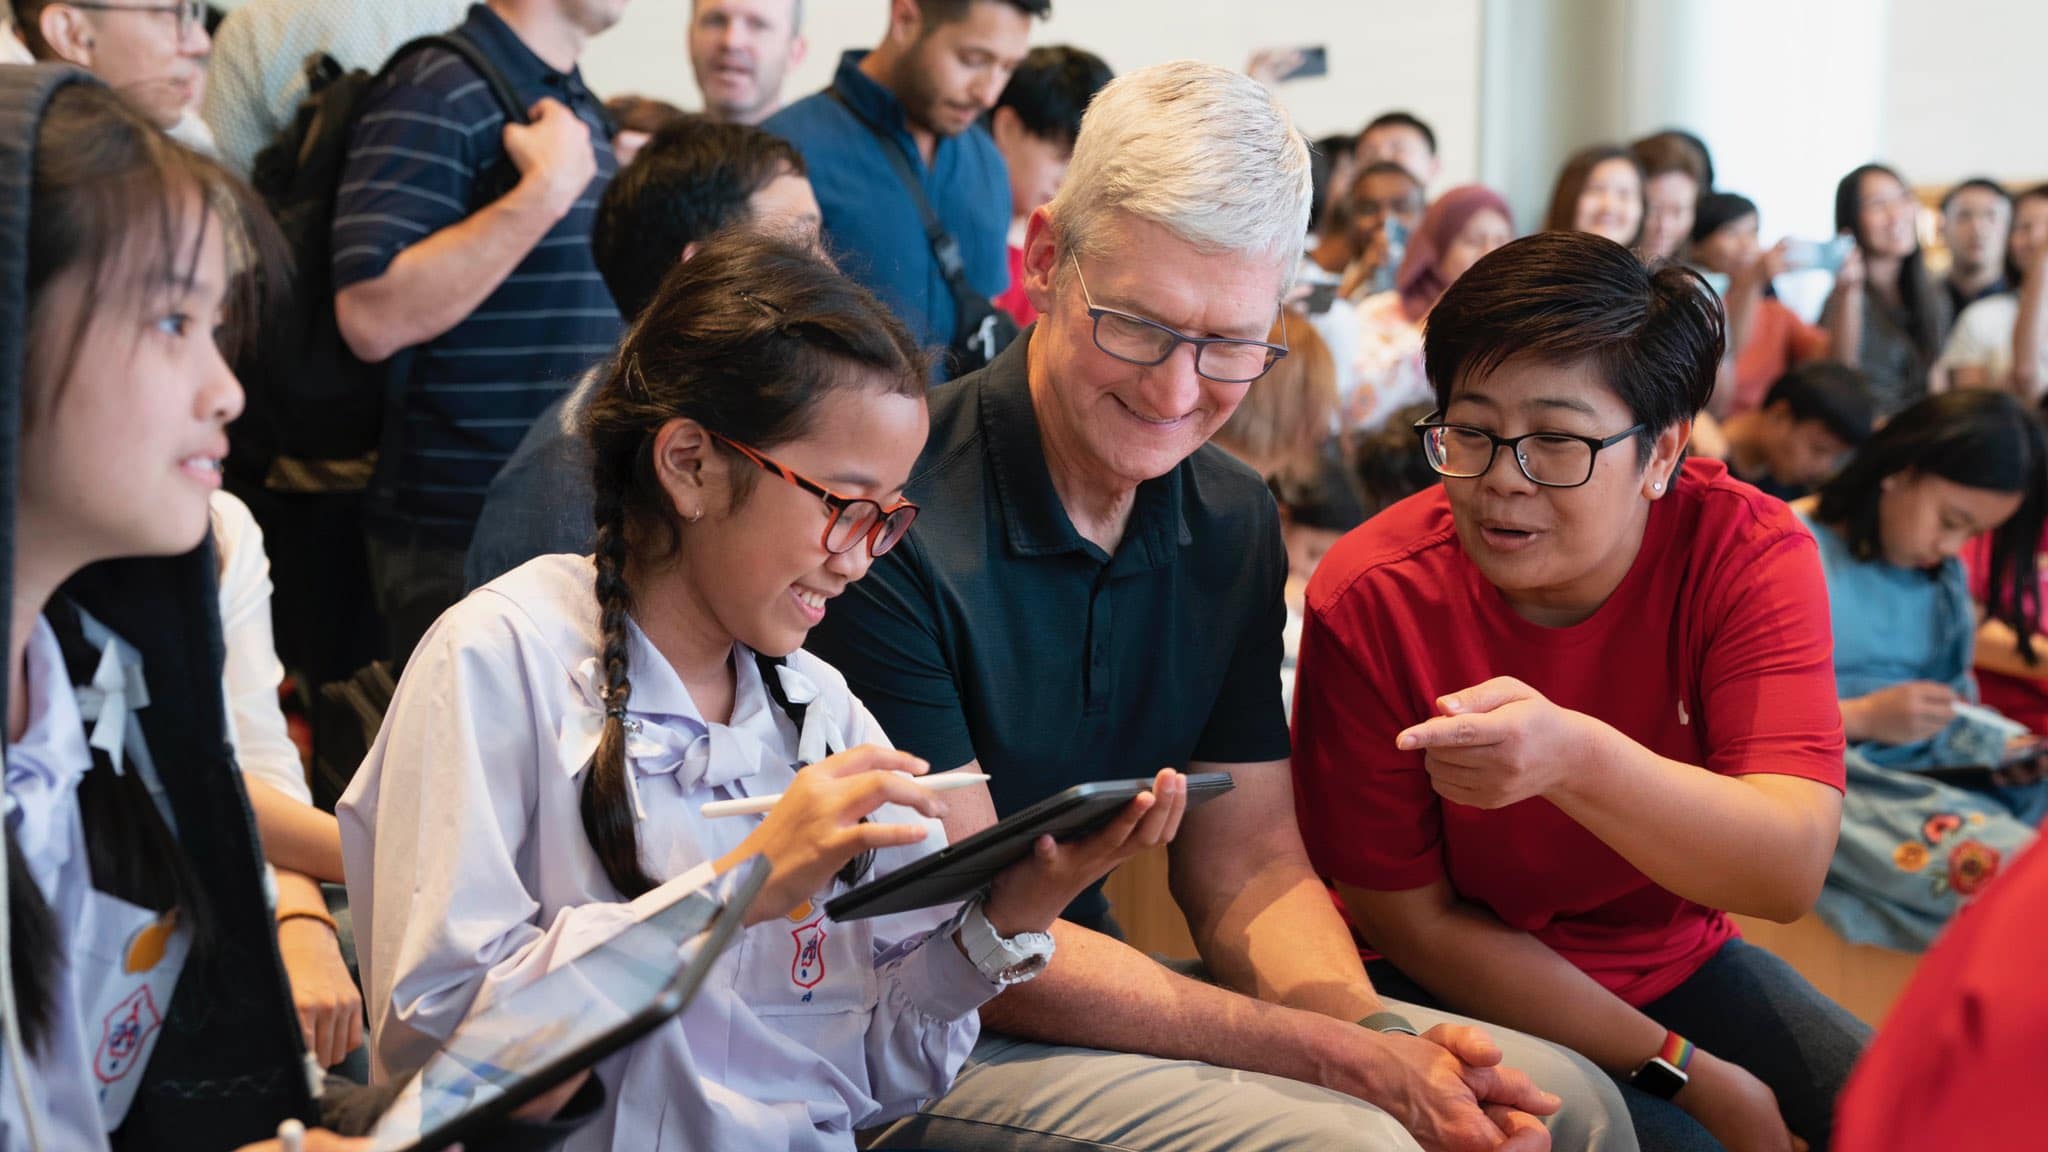 Asia Tour: In Thailand, Tim Cook meets WWDC fellows, volleyball team and more